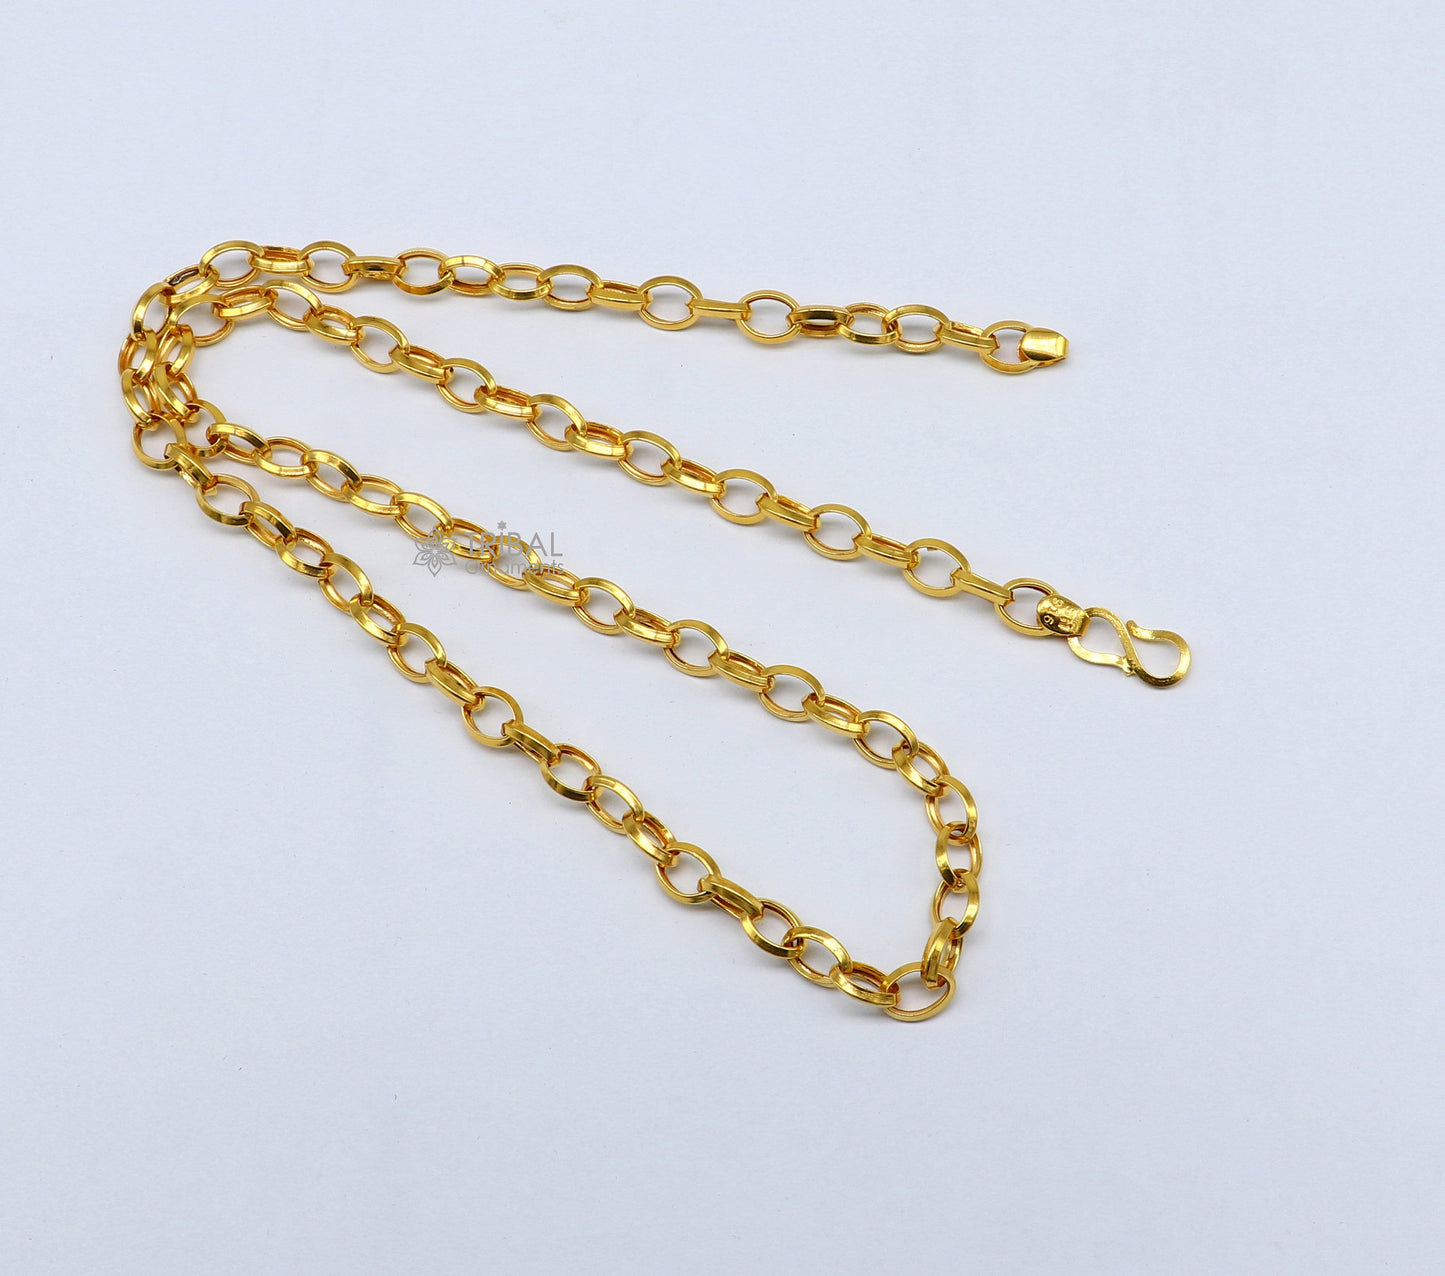 22kt yellow gold handmade fabulous cable rolo chain unisex necklace jewelry best gifting chain from india best gifting jewelry gch589 - TRIBAL ORNAMENTS